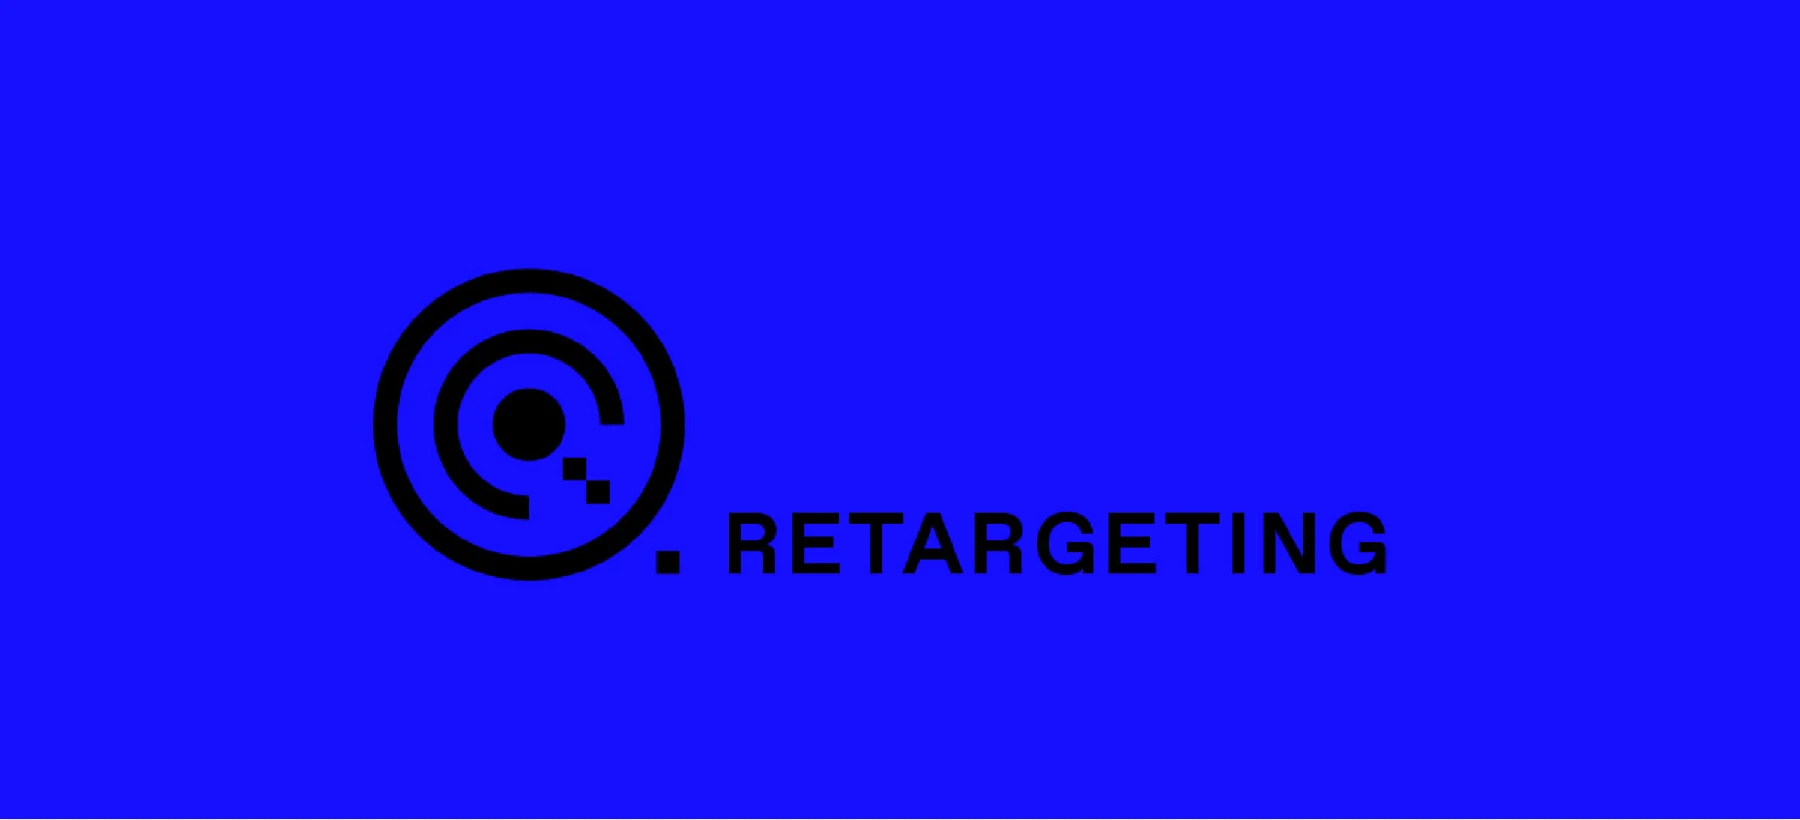 5 Tips for Setting Up a Successful Programmatic Retargeting Campaign on TV